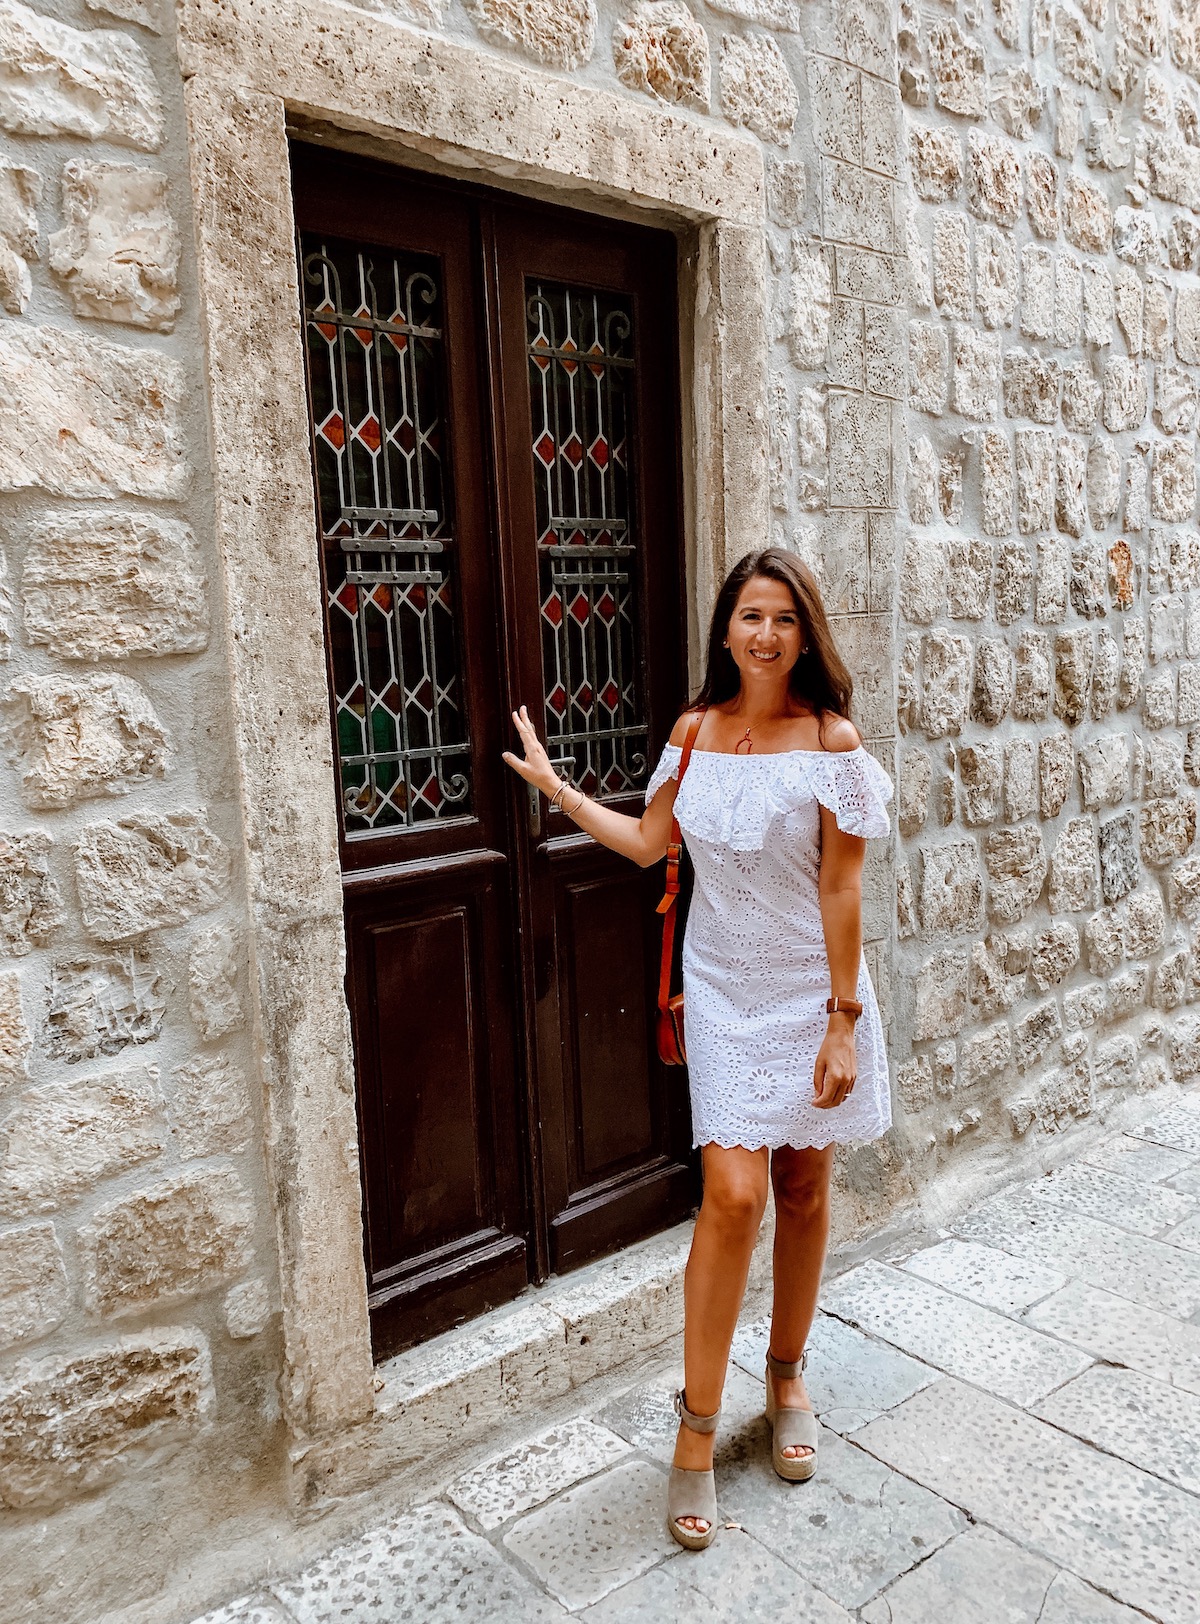 Eat+Stay+Play: Dubrovnik Travel Guide | Cathedrals & Cafes Blog